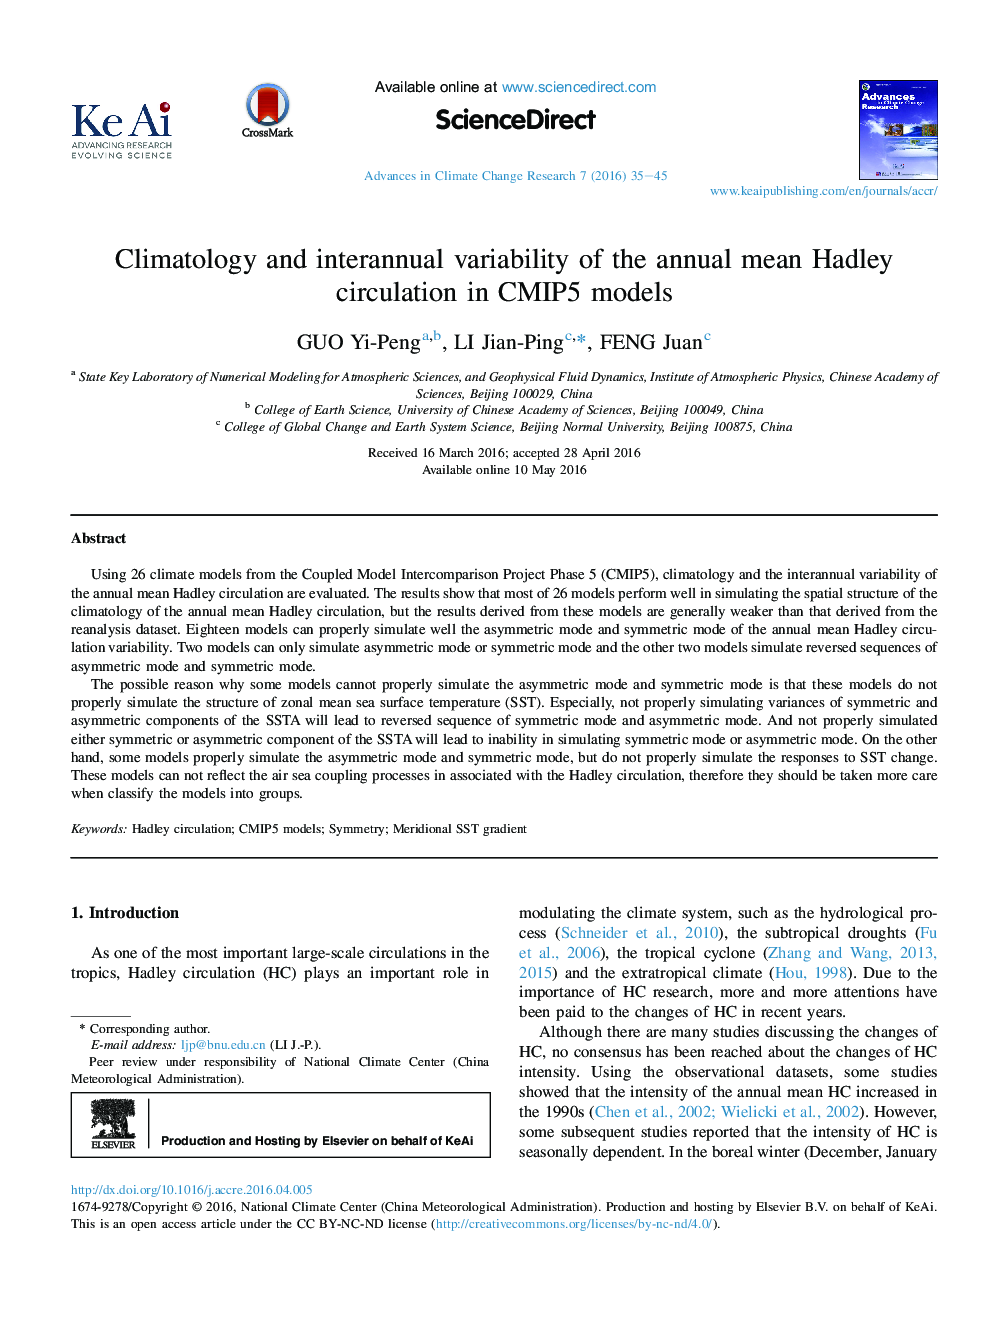 Climatology and interannual variability of the annual mean Hadley circulation in CMIP5 models 